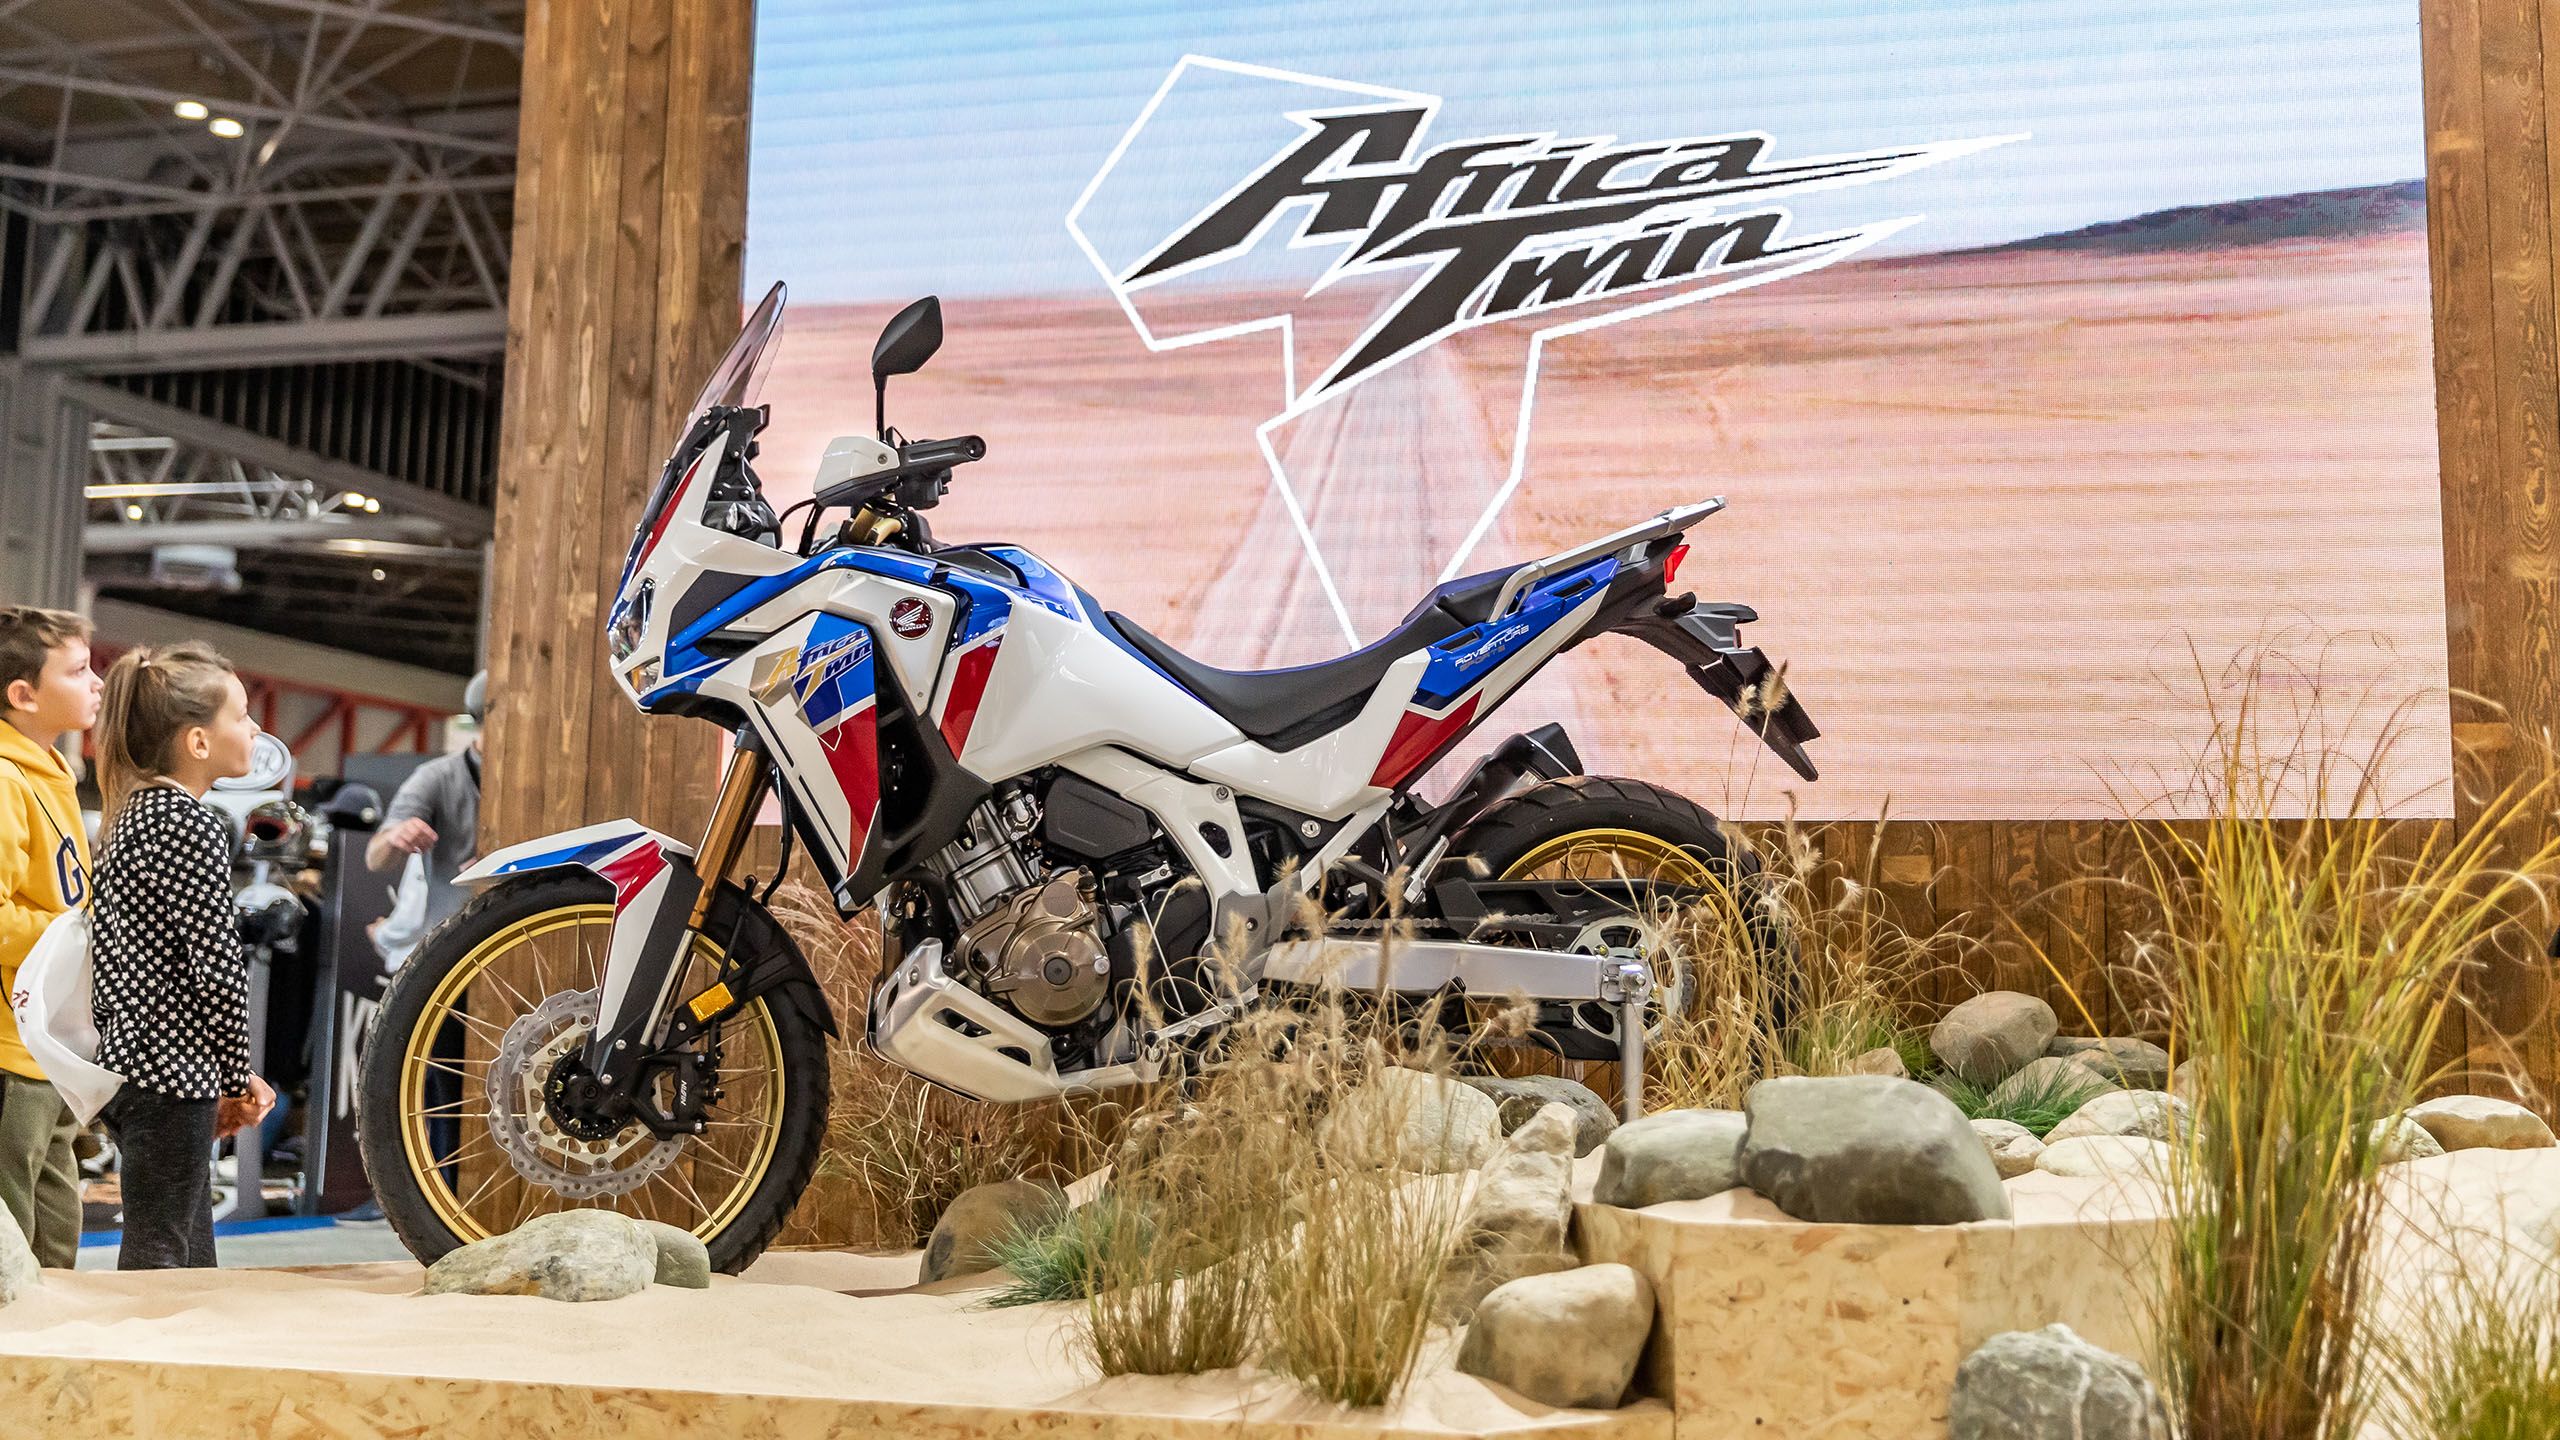 2020 Honda Africa Twin on stand at Motorcycle Live 2019 at Birmingham NEC